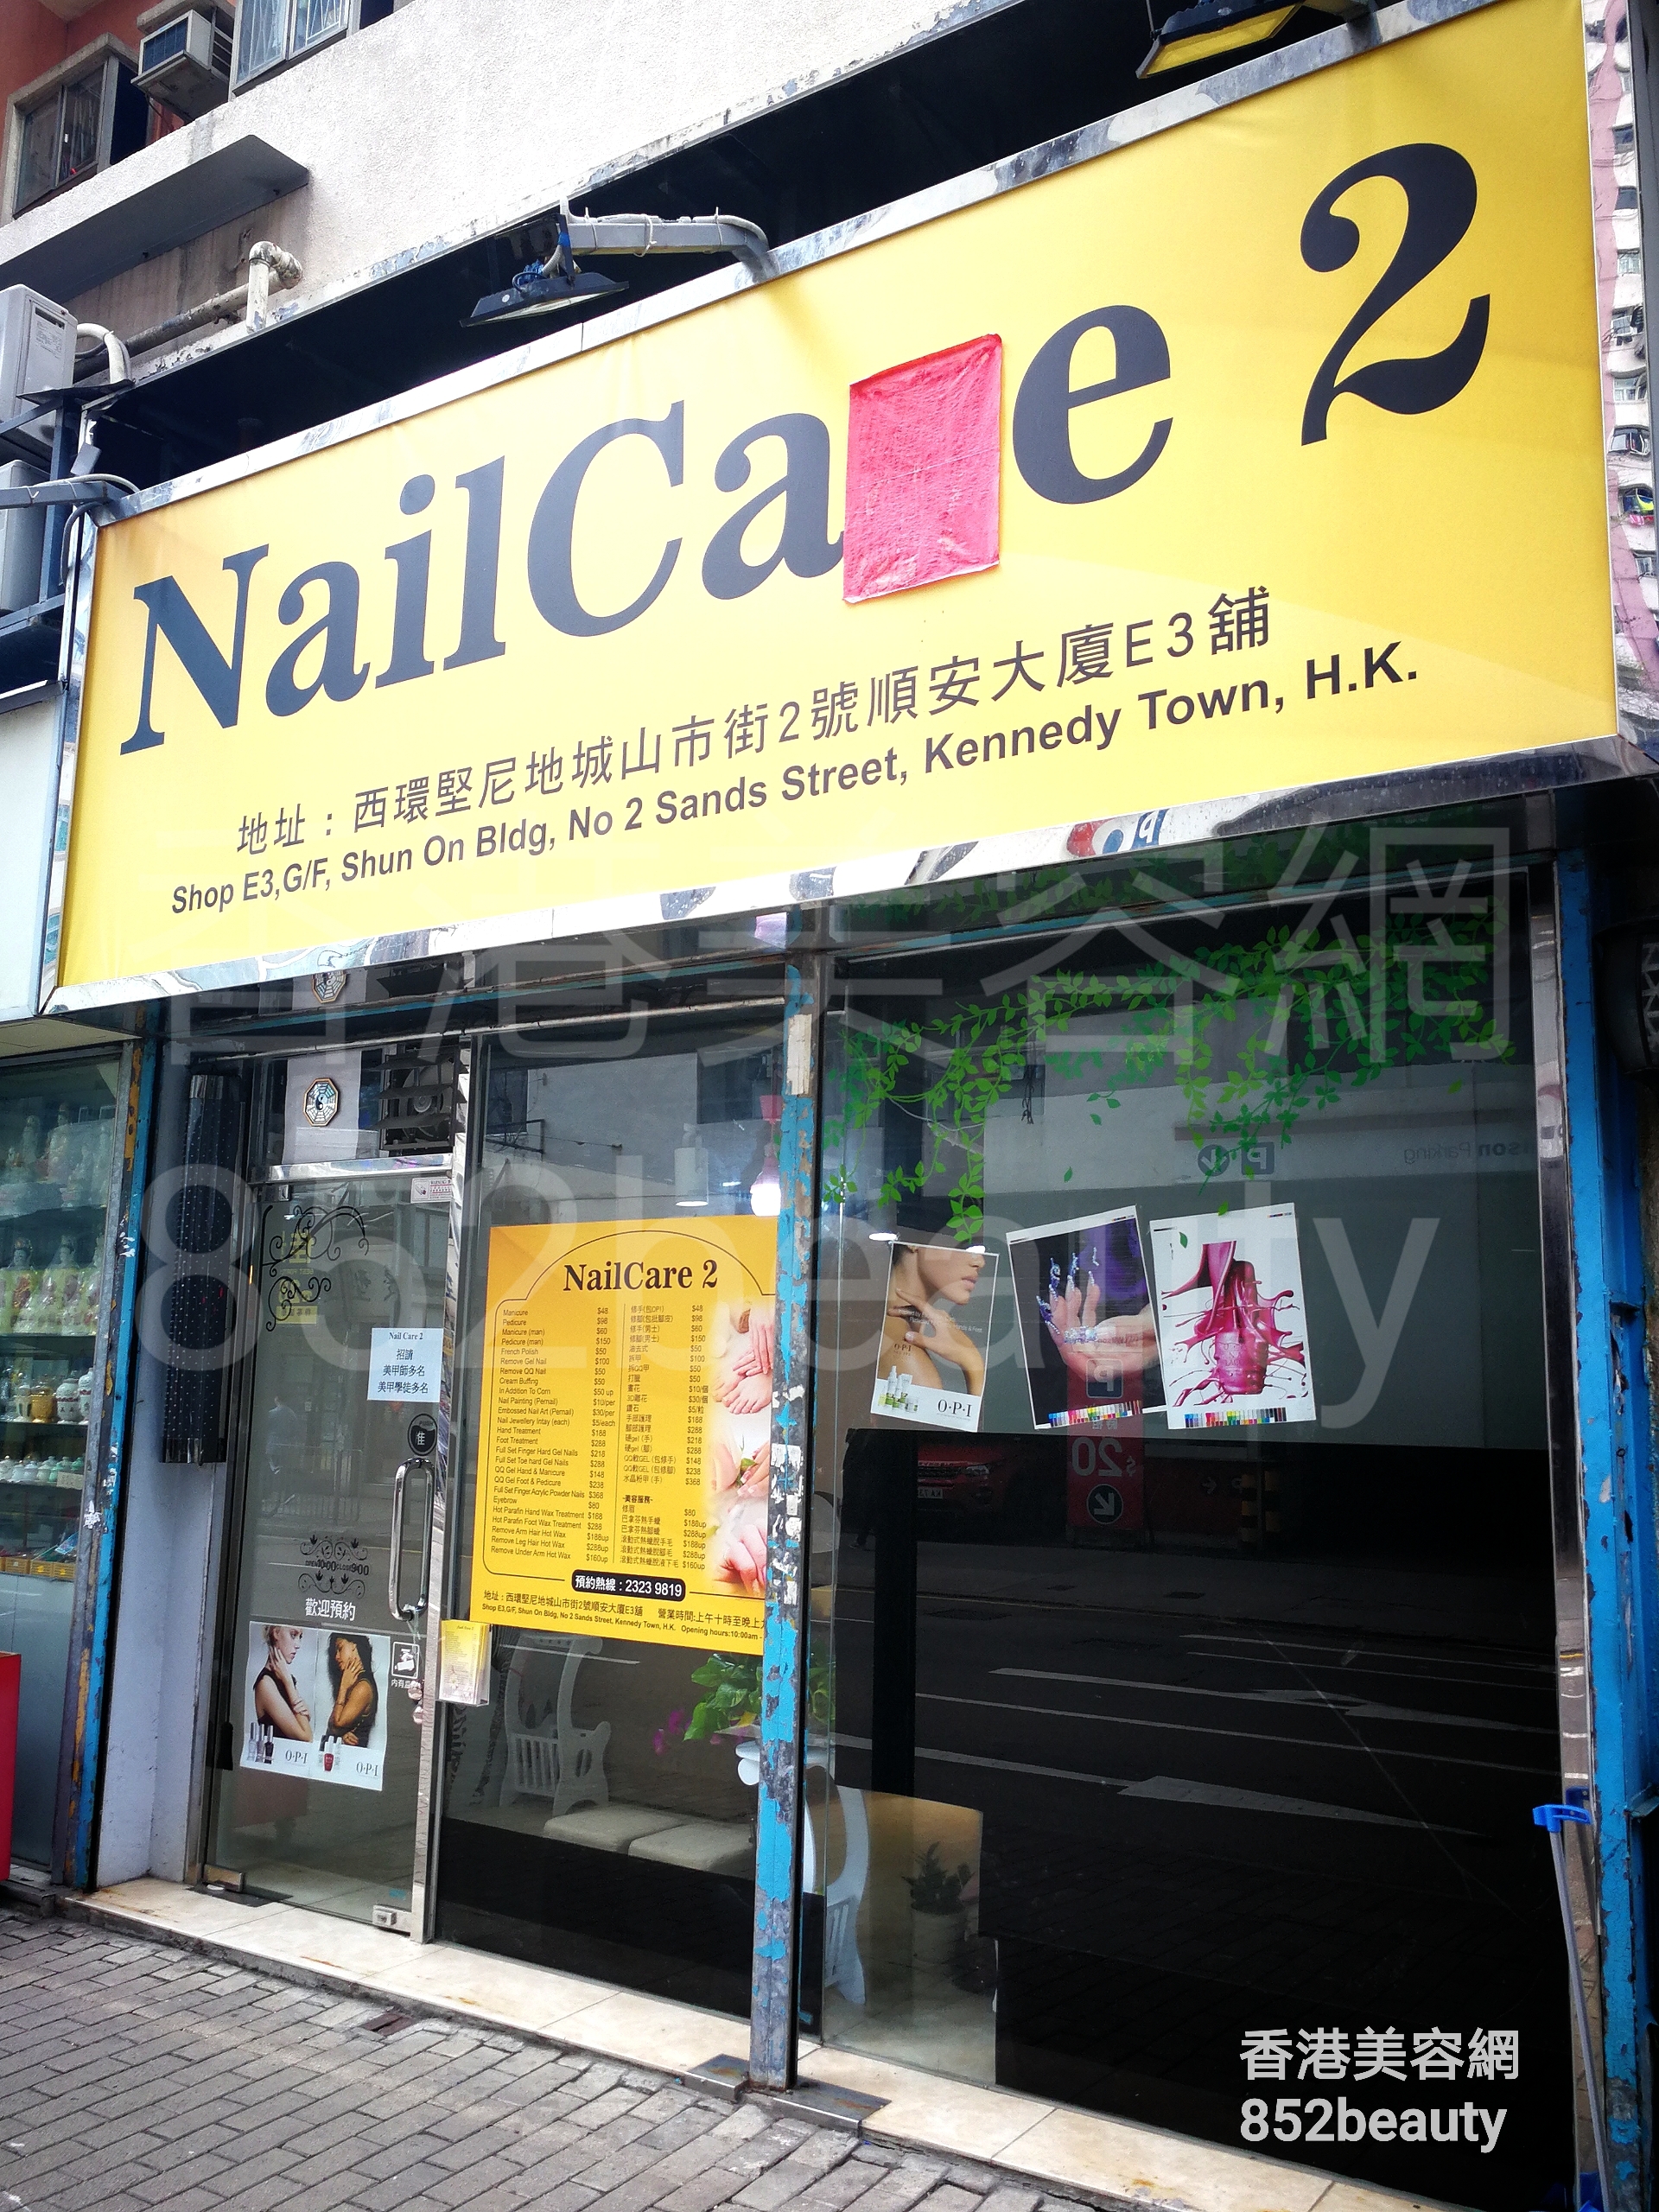 Hand and foot care: NailCare 2